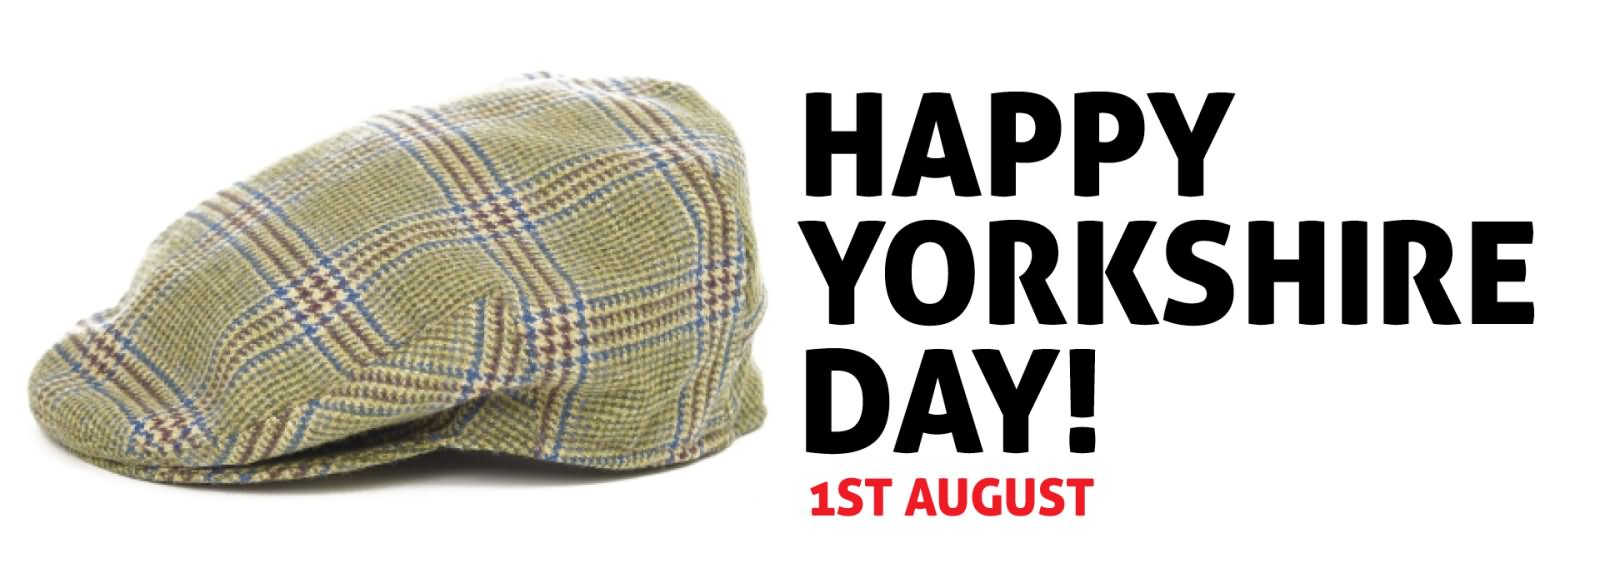 Happy Yorkshire Day 1st August